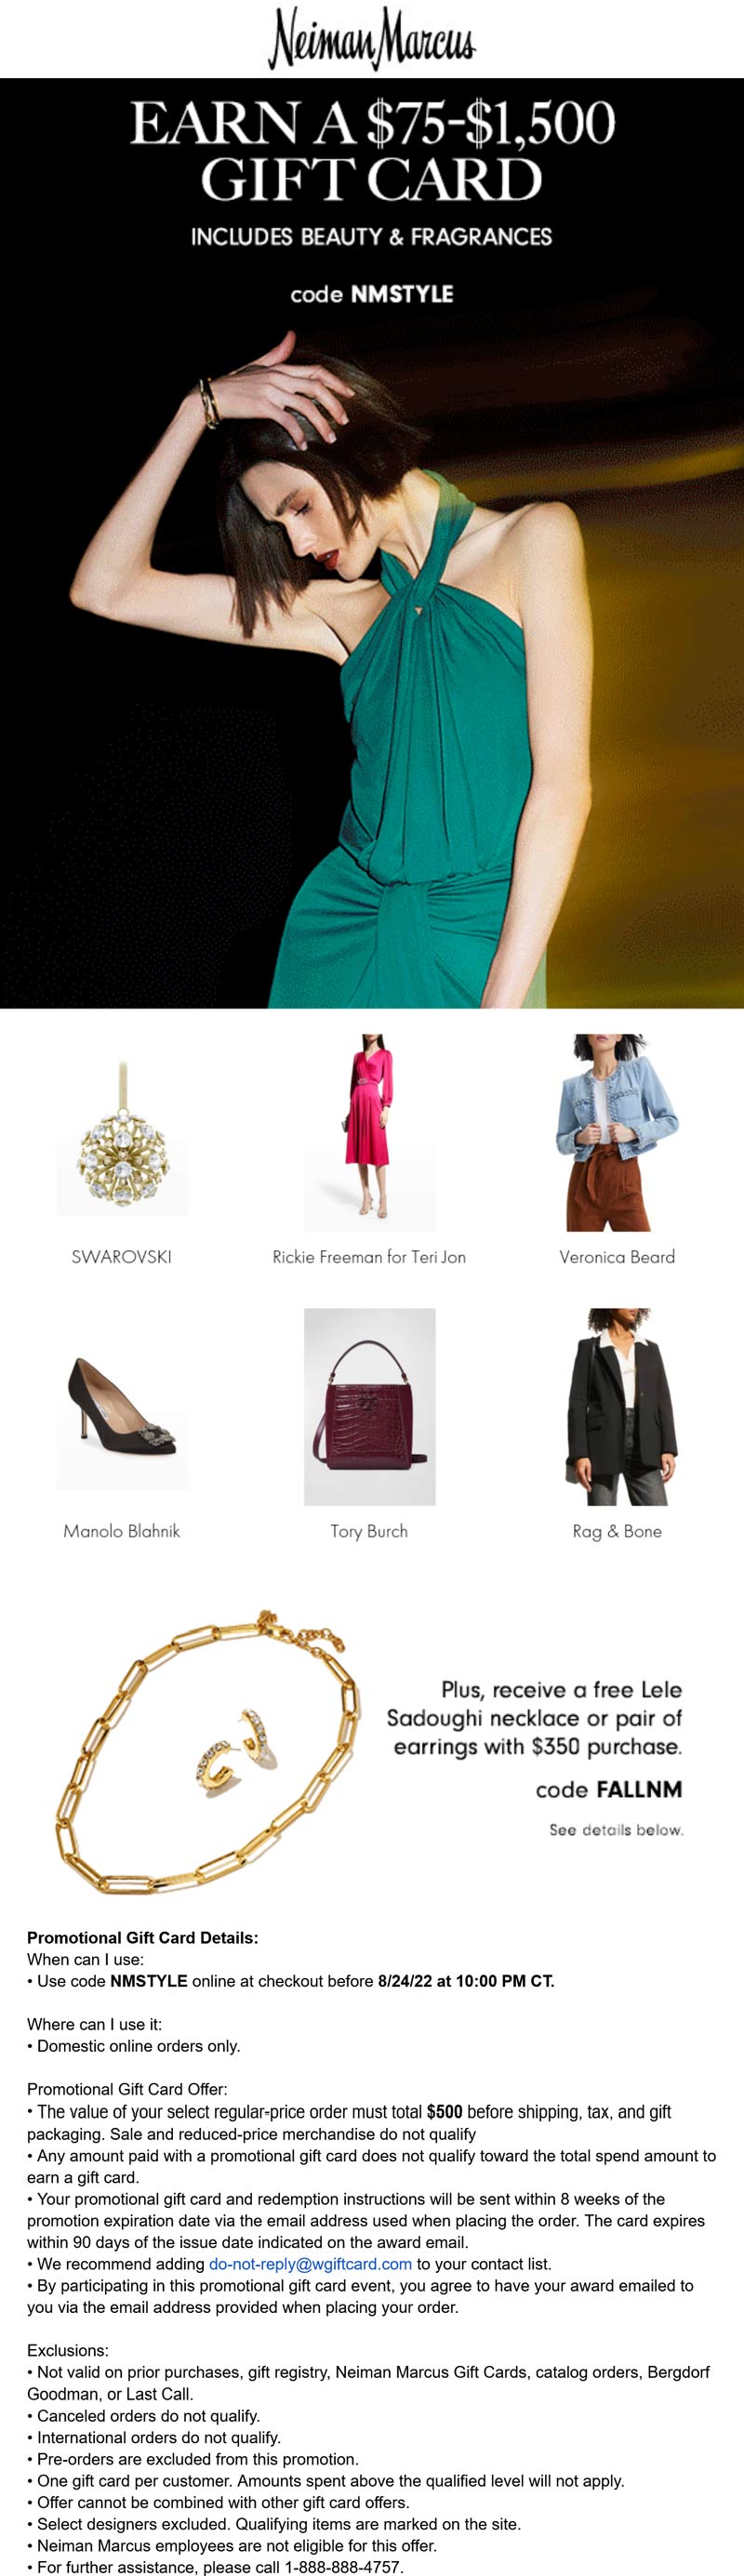 Neiman Marcus coupons & promo code for [November 2022]